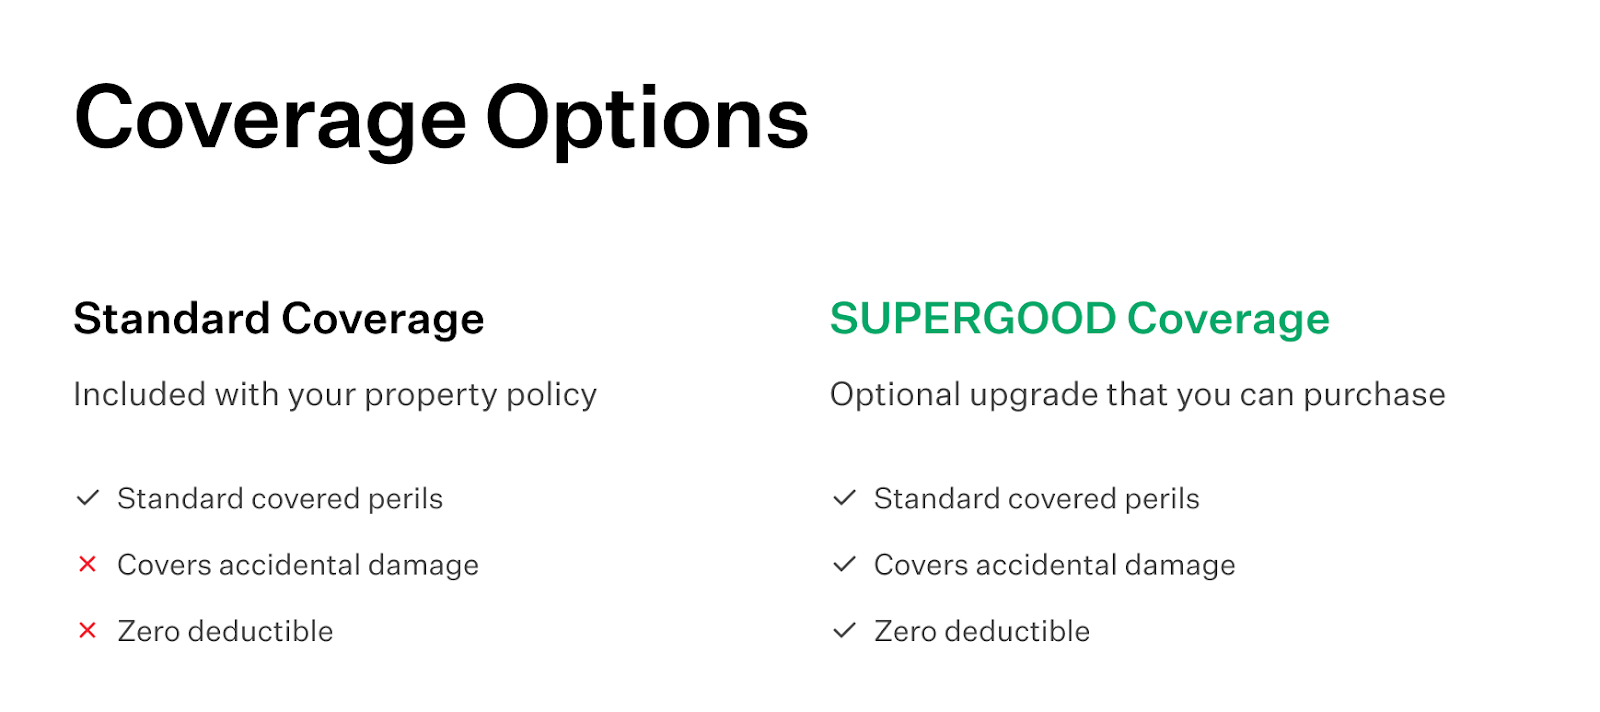 Goodcover’s coverage options.